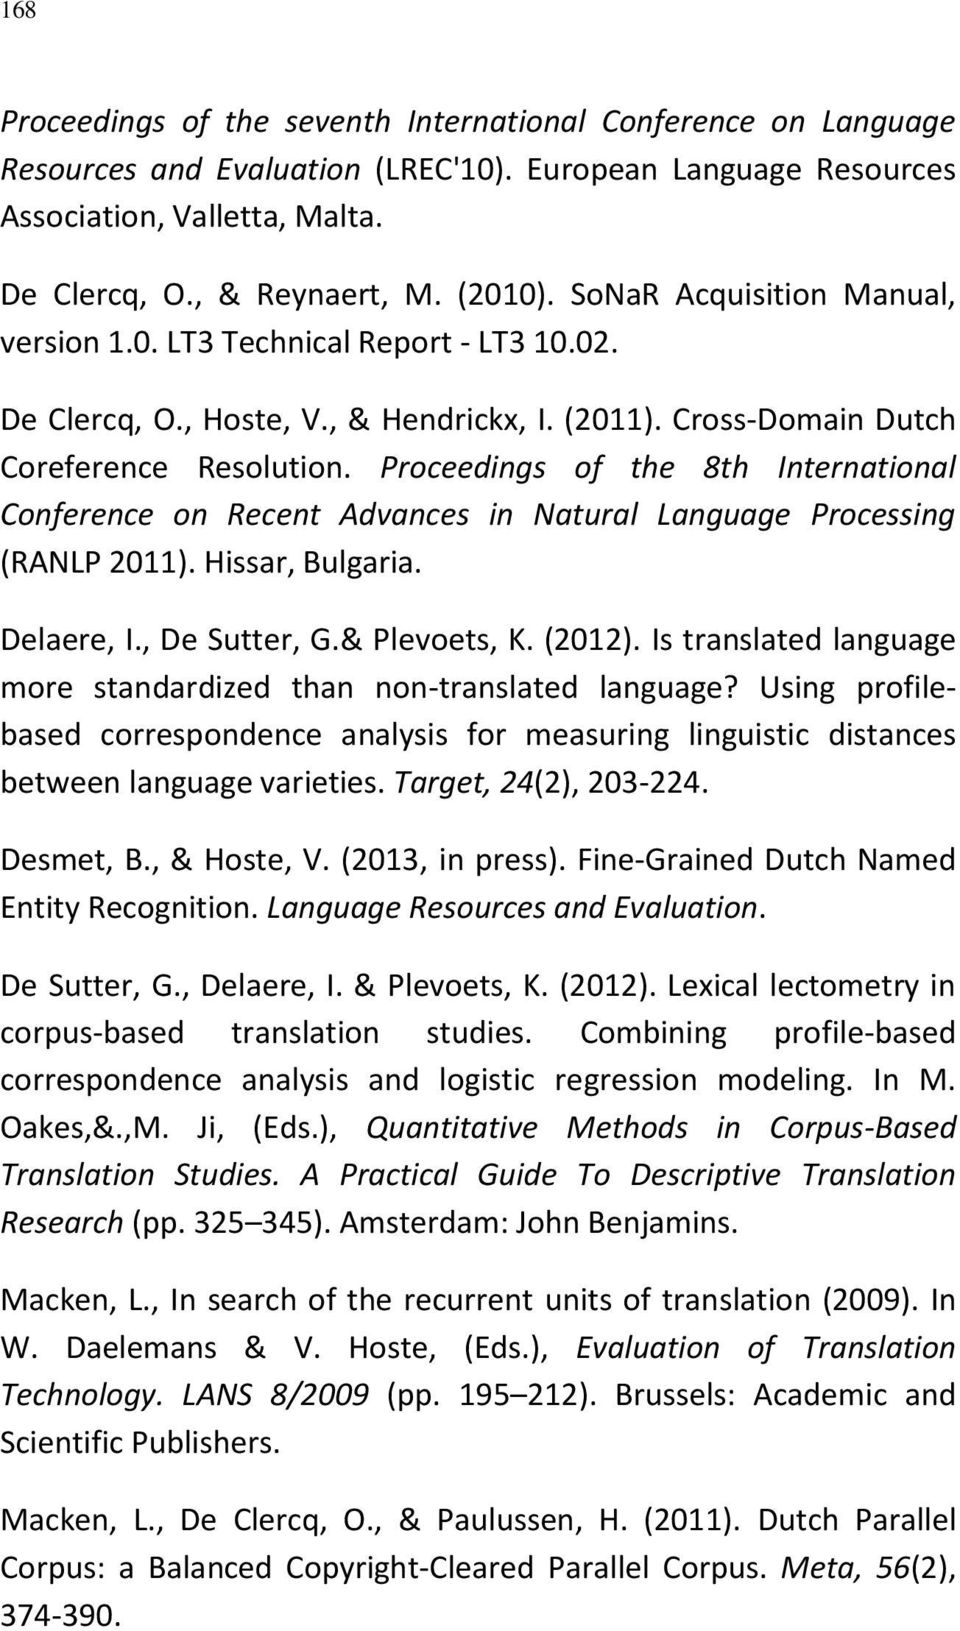 Proceedings of the 8th International Conference on Recent Advances in Natural Language Processing (RANLP 2011). Hissar, Bulgaria. Delaere, I., De Sutter, G.& Plevoets, K. (2012).